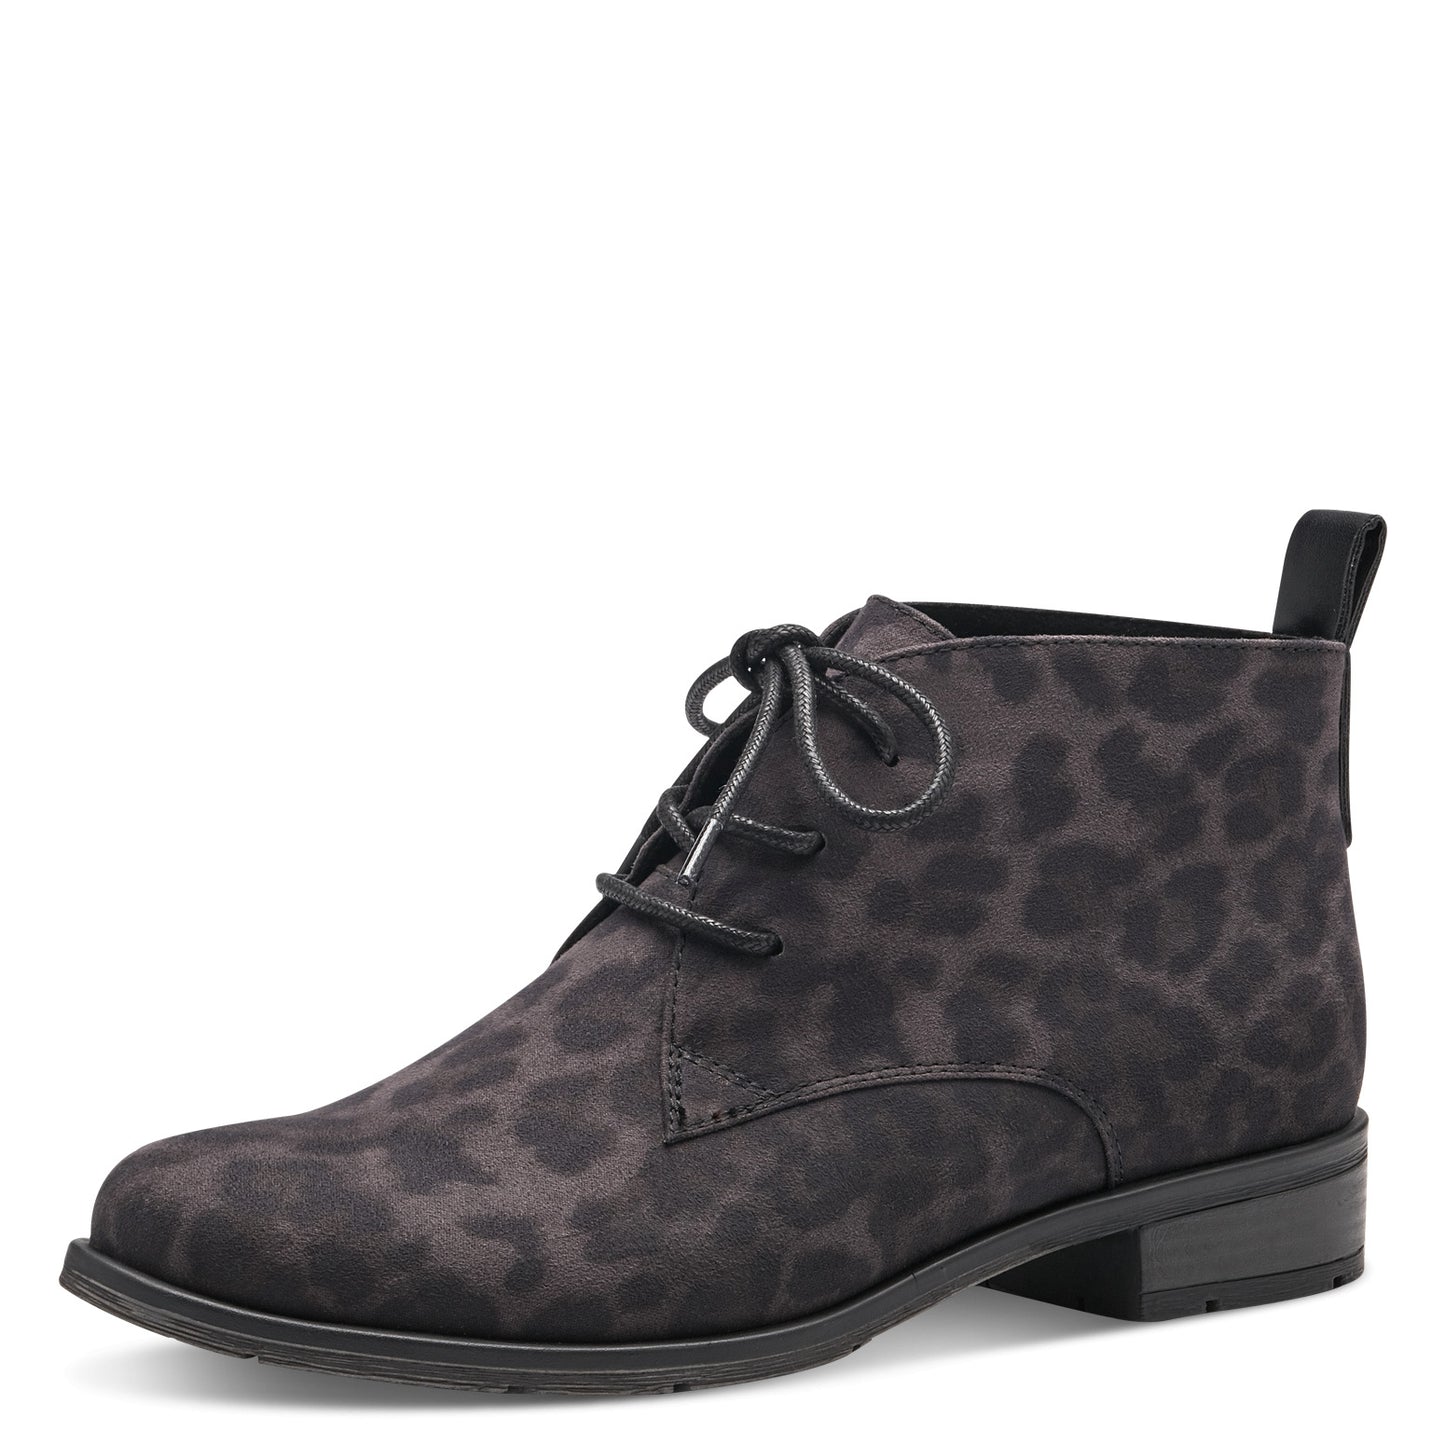 Marco Tozzi Ankle Boots  Grey/Leopard